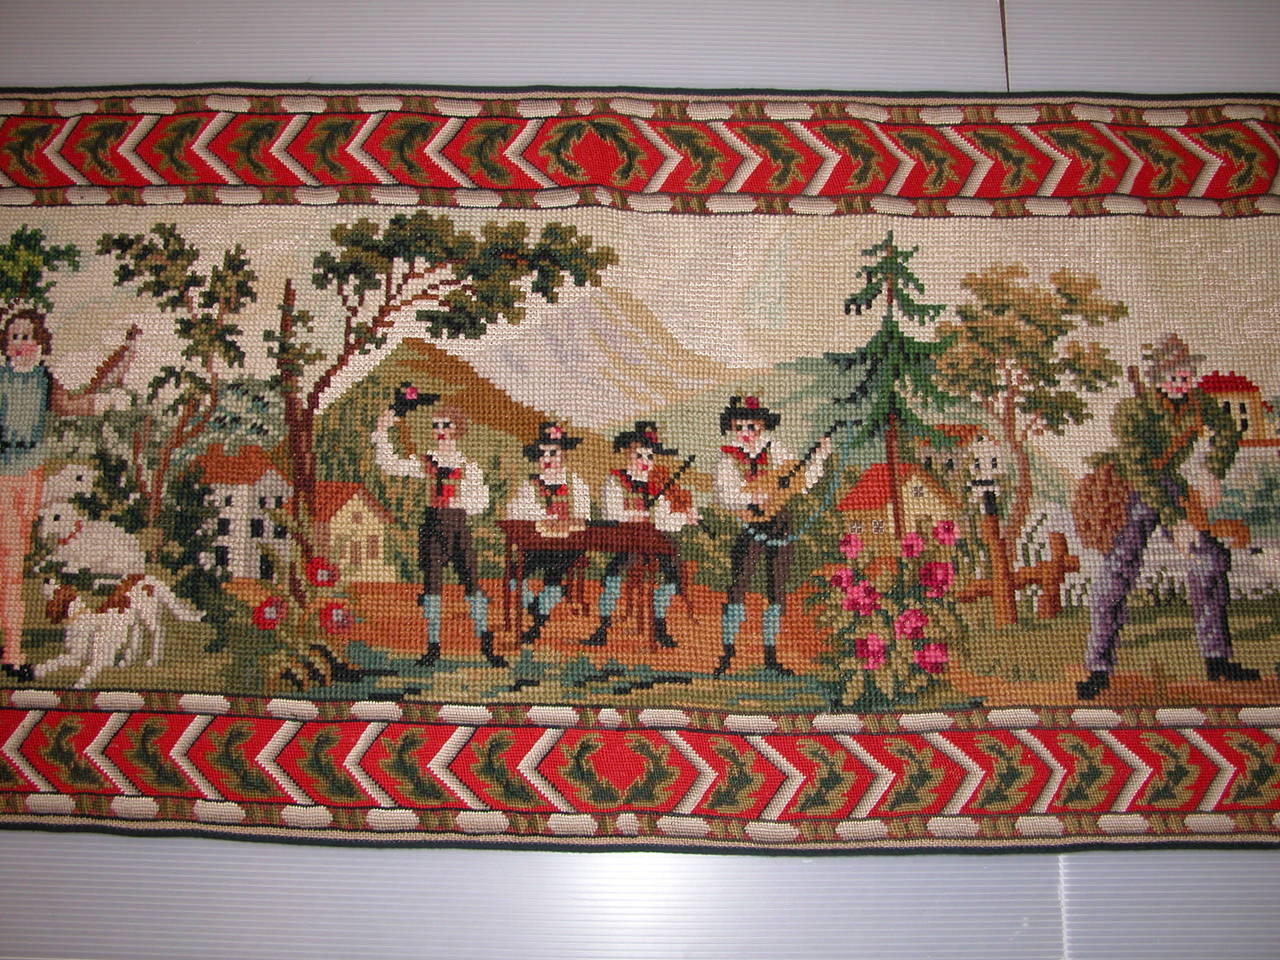 Bohemian Early 20th Century Needlepoint Runner Depicting Austrian Figures